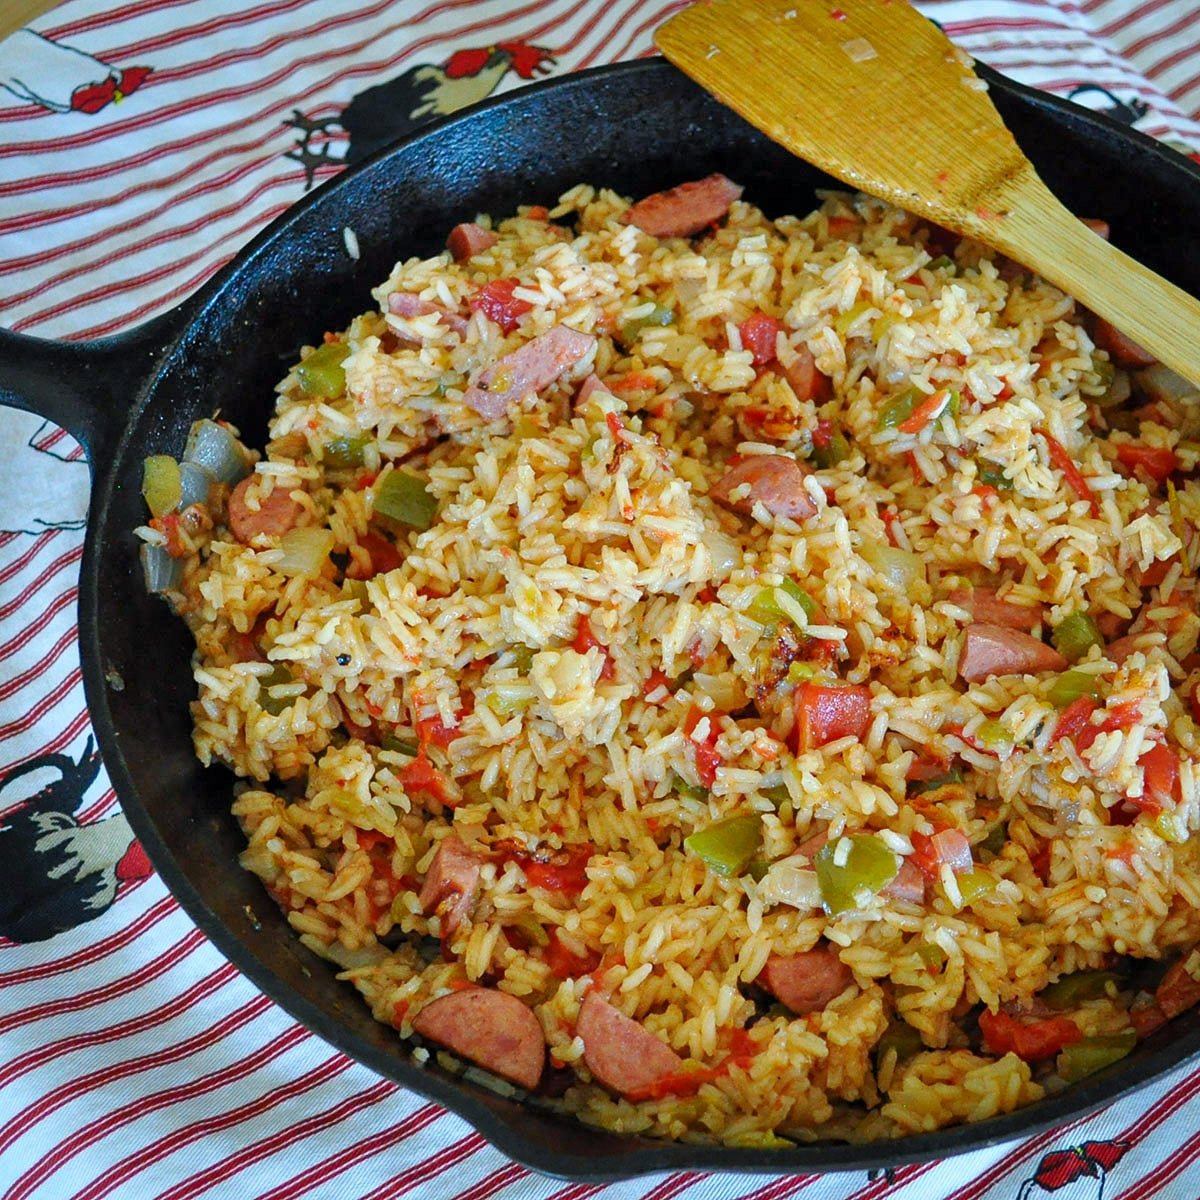 a cast iron skillet filled with jambalaya sitting on a rooster print apron